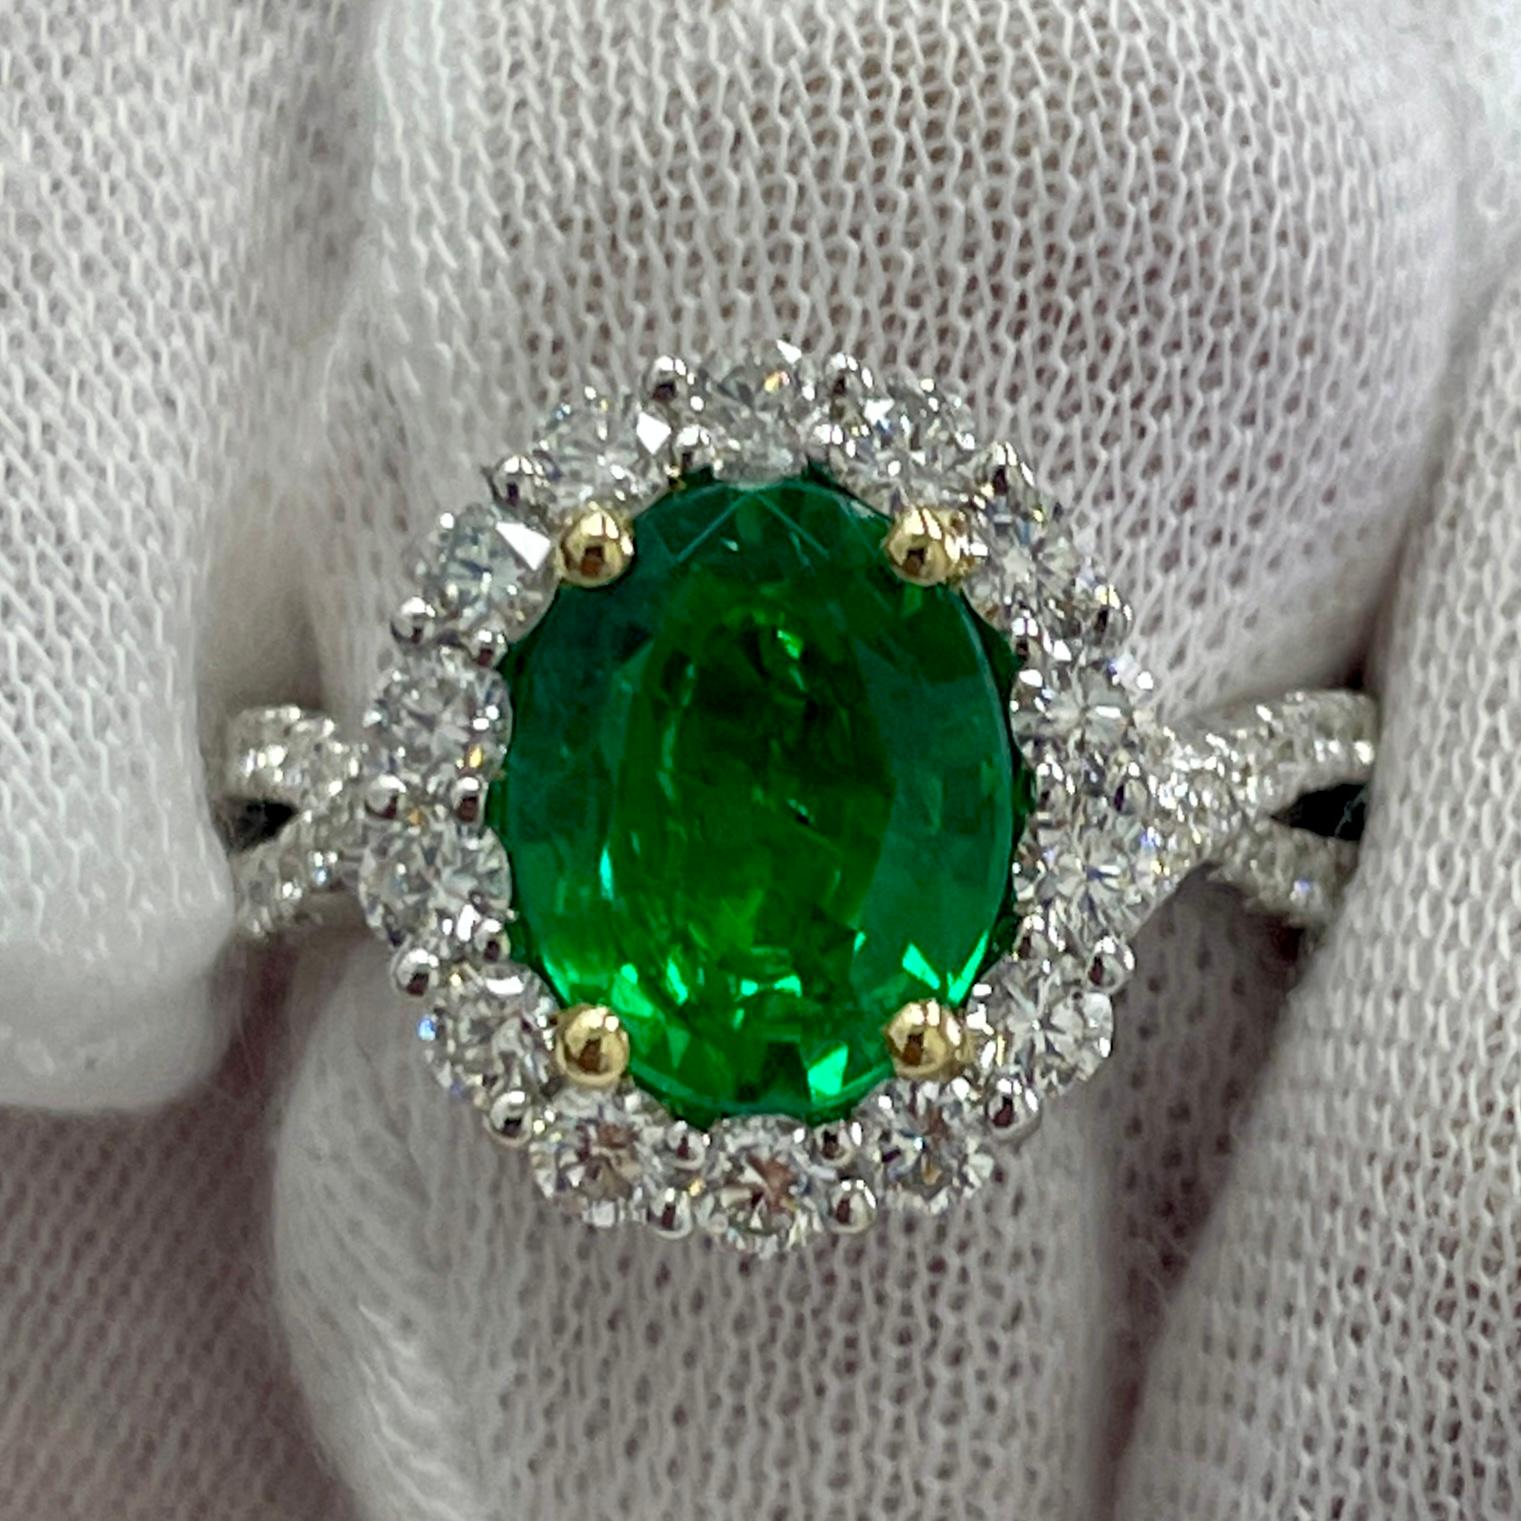 This is a LIVELY emerald with an open color, mounted in an elegant 18K white gold [with a yellow gold basket] and diamond ring with 1.06Ct of brilliant white diamonds. Suitable for any occasion!